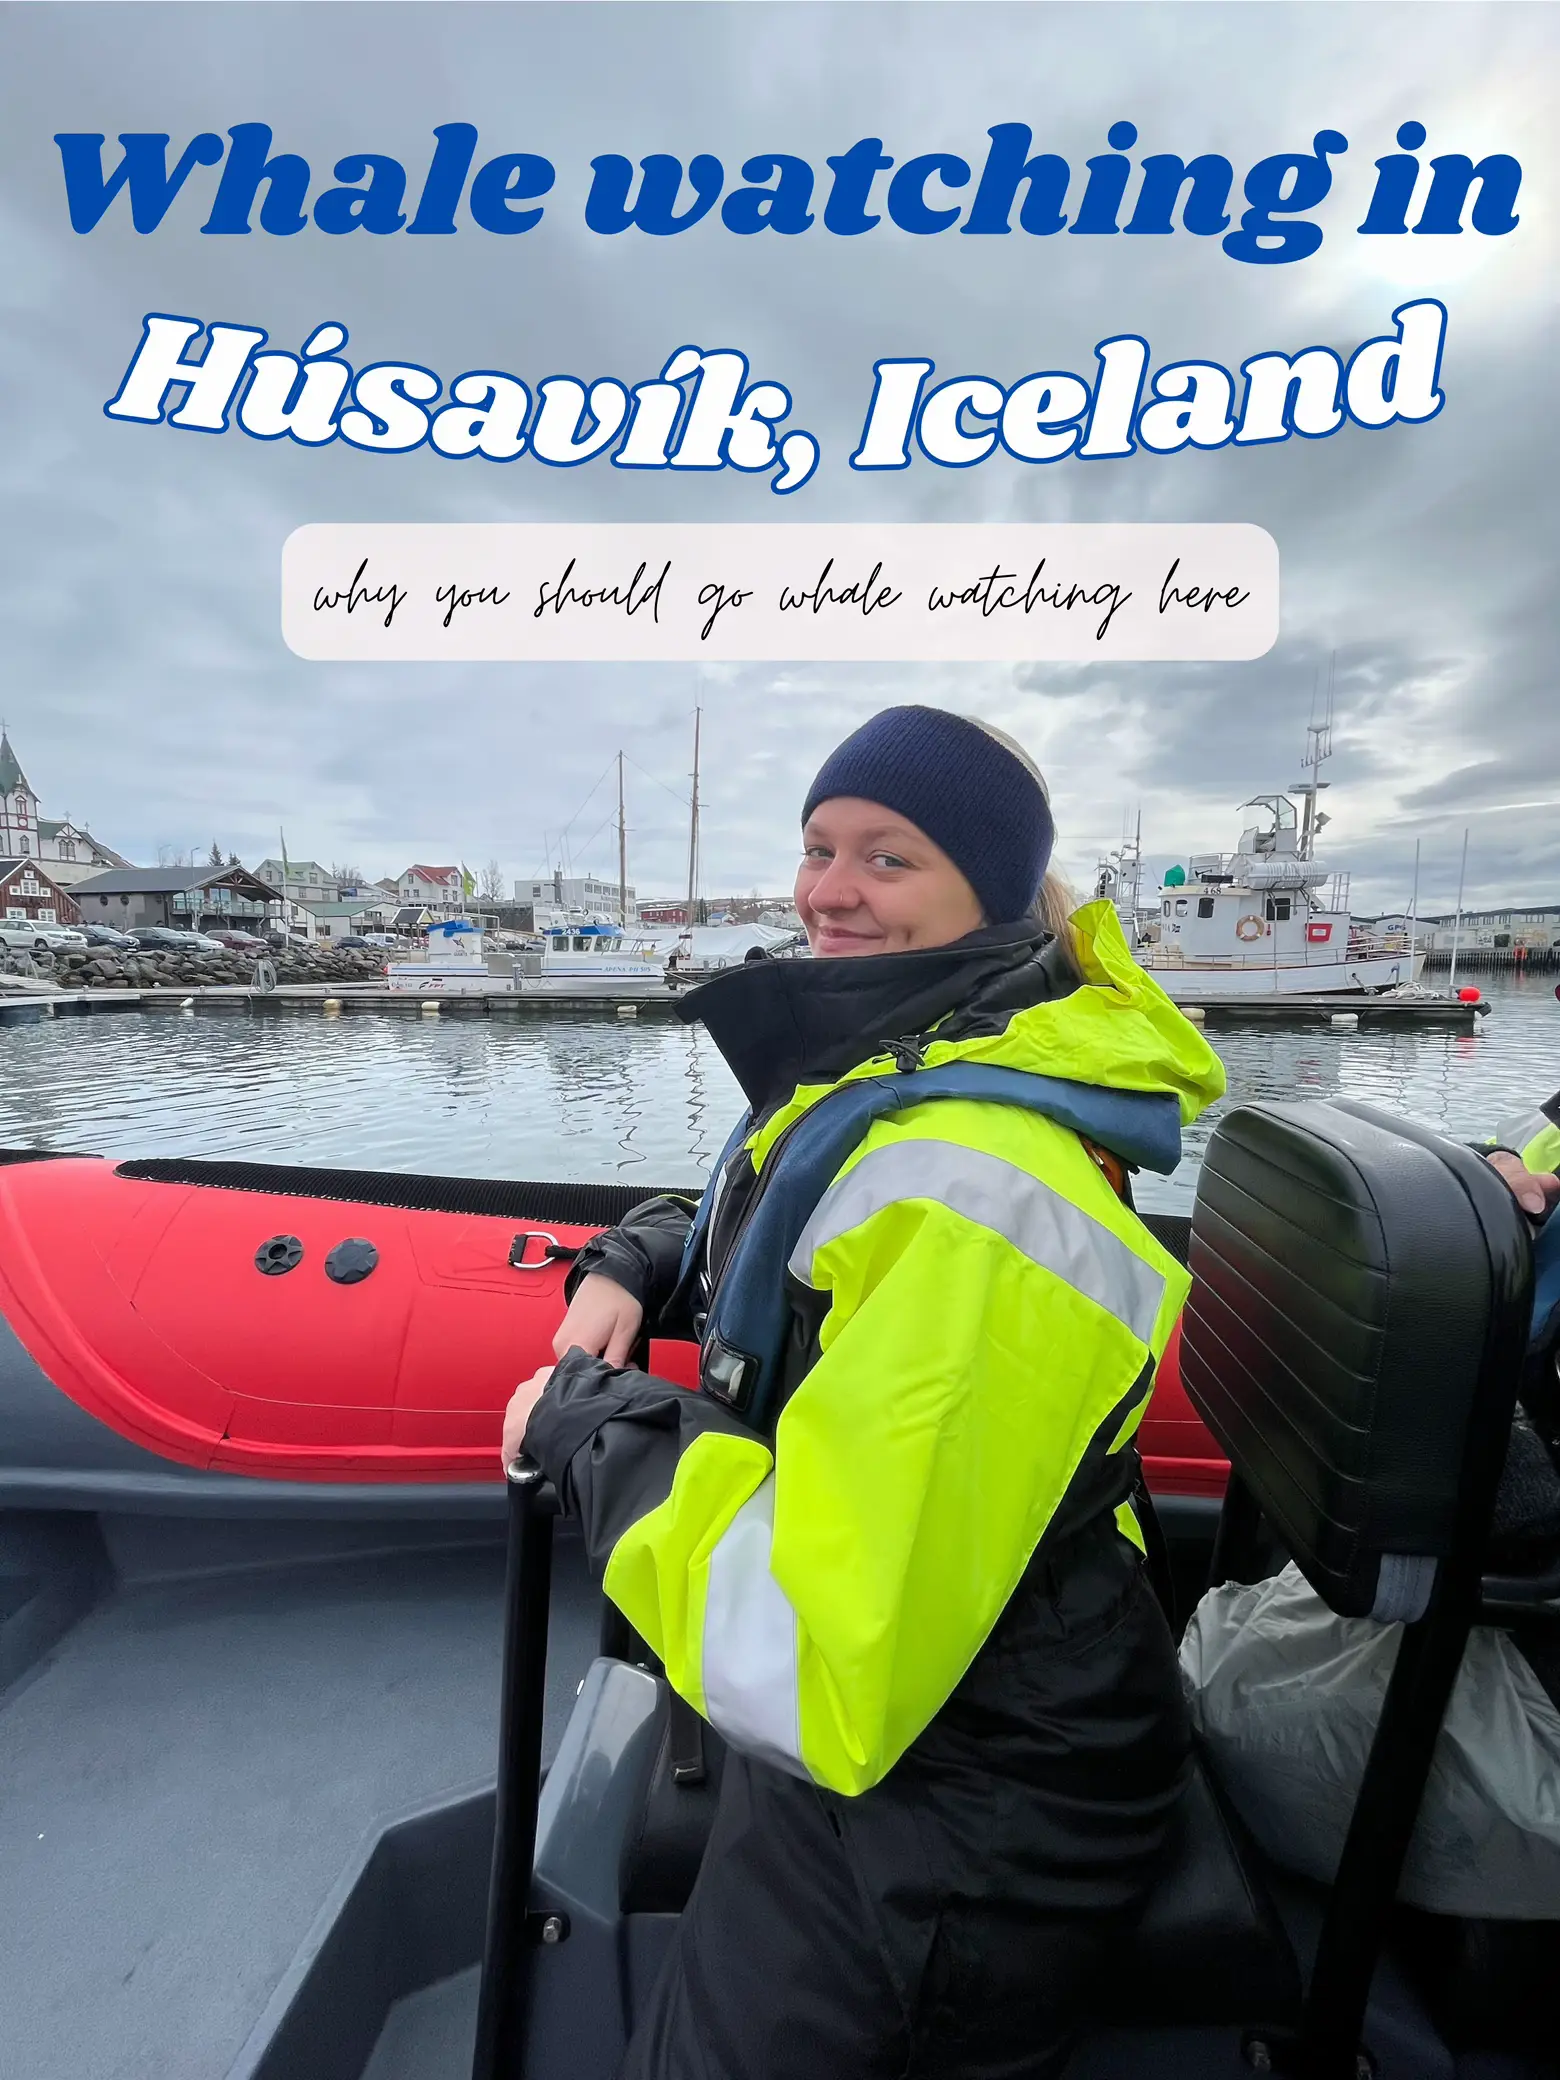 whale watching in iceland - Lemon8 Search